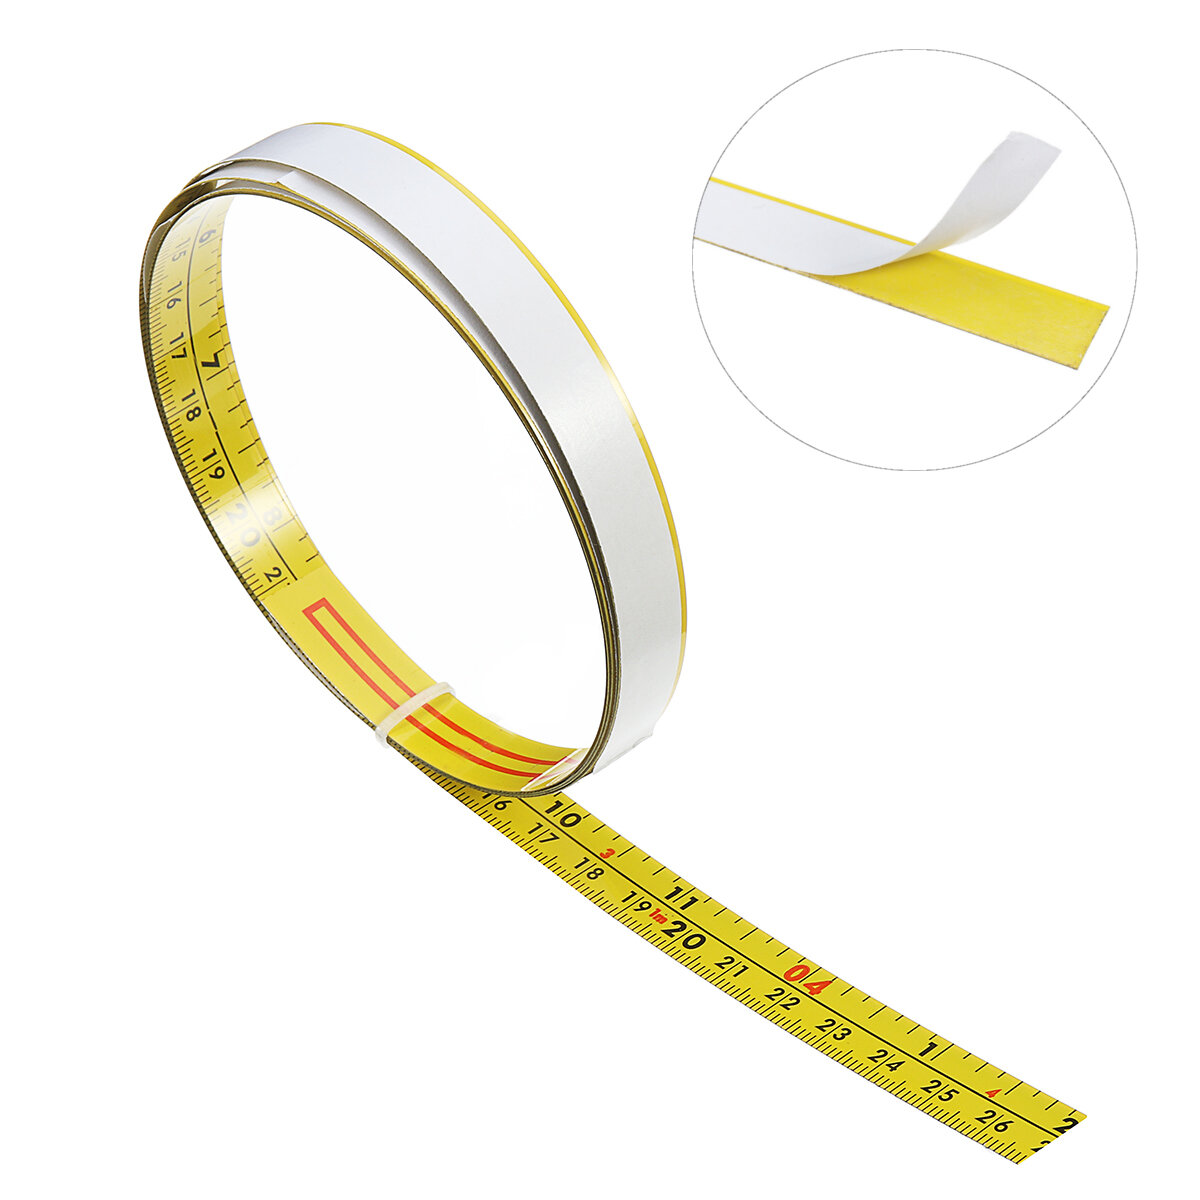 Self Adhesive Inch and Metric Ruler Miter Track Tape Measure Steel Miter Saw Scale For T-track Router Table Band Saw Woo